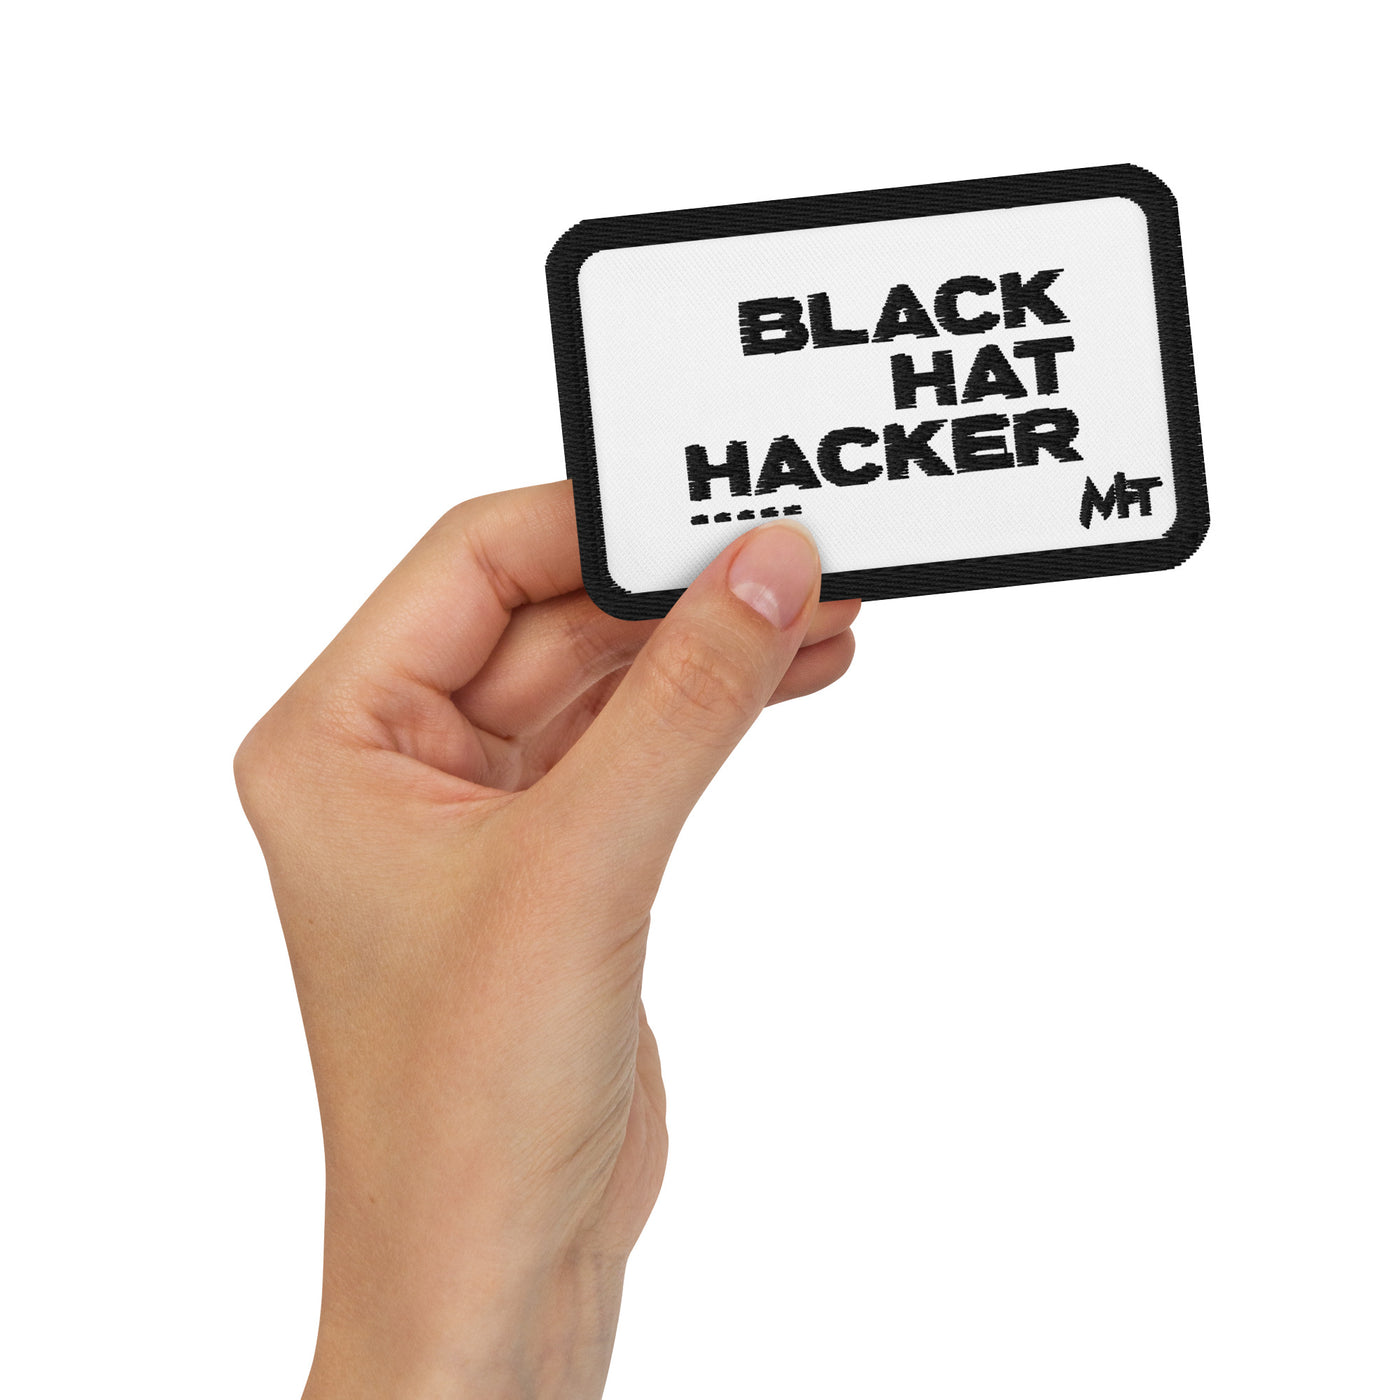 Black Hat Hacker V5 - Embroidered patches